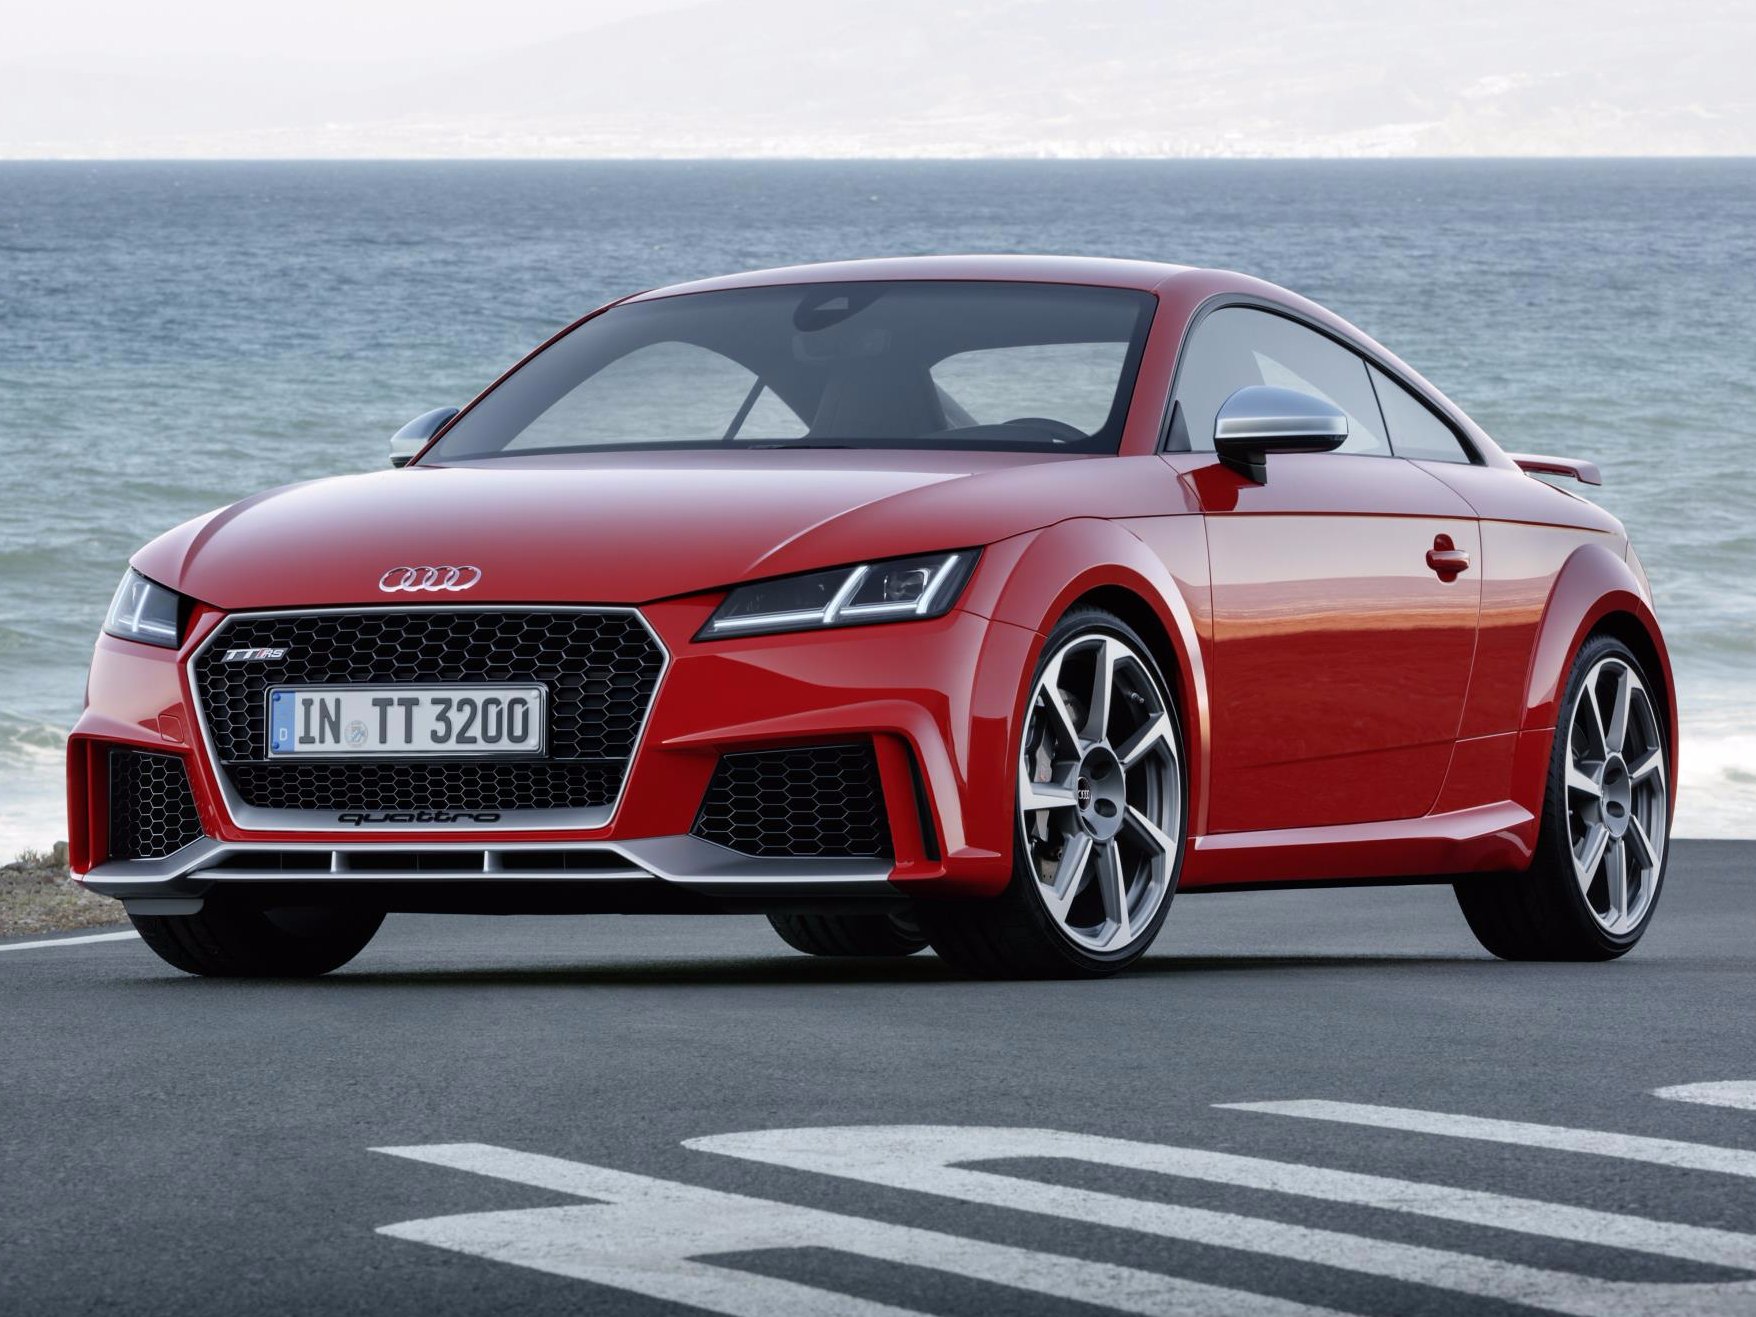 Audi just unleashed an insane TT sports car – that America can't have